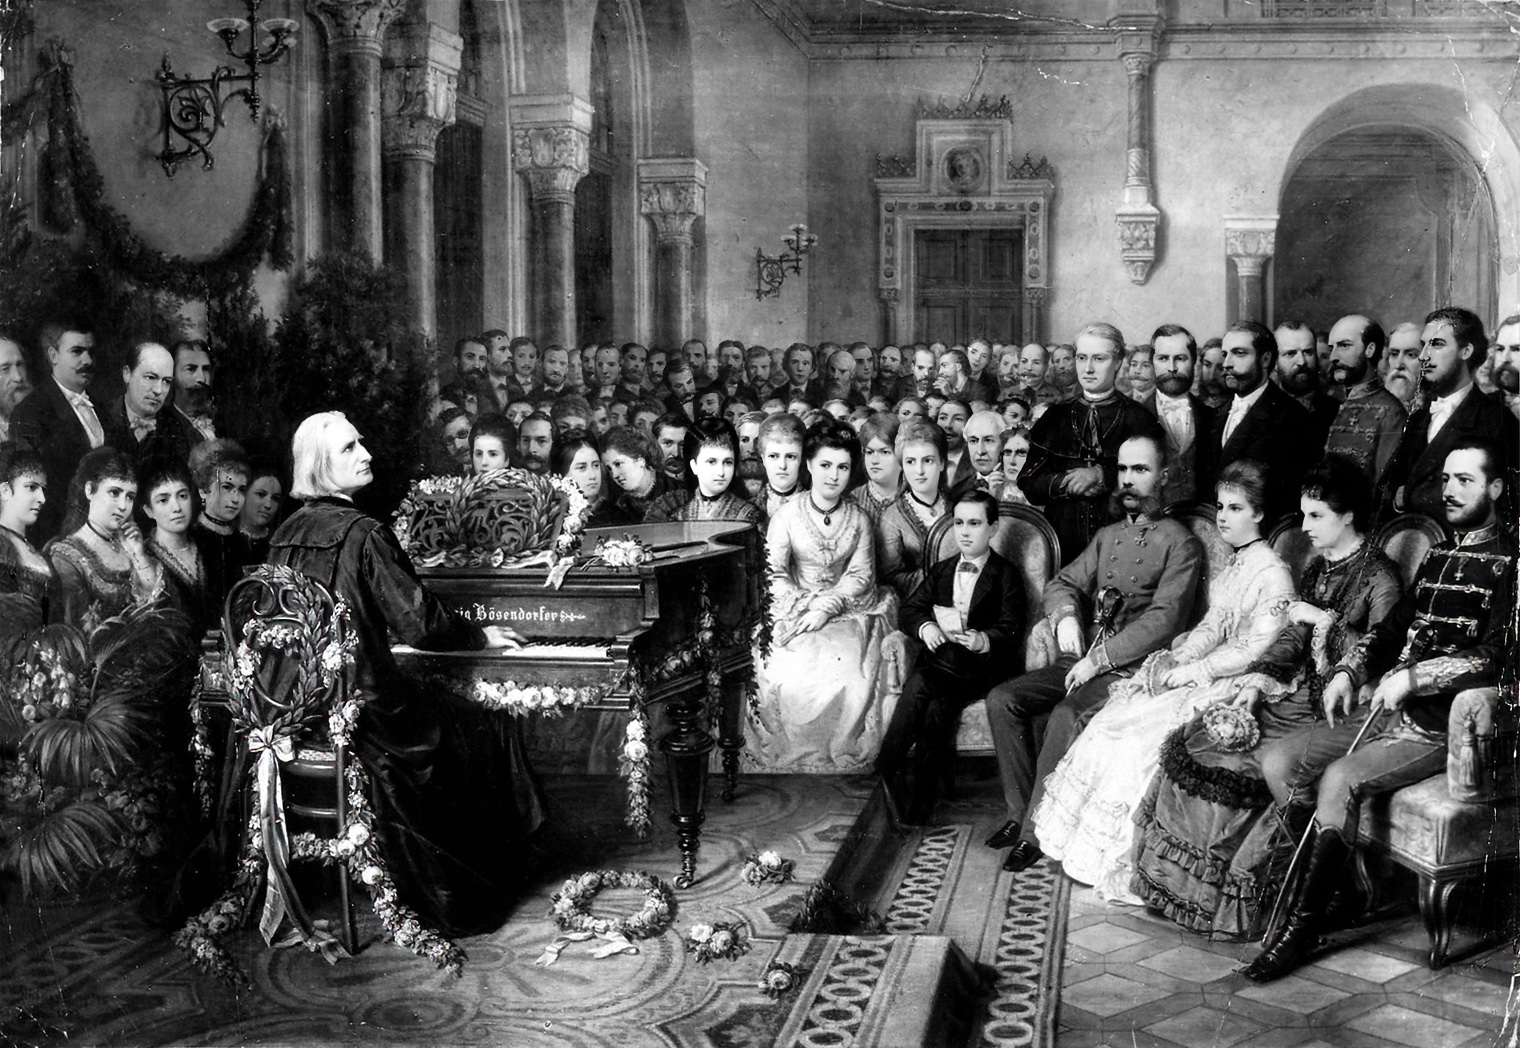 Liszt playing for Emperor Franz Josef | Unknown artist, 1872 | Time Life